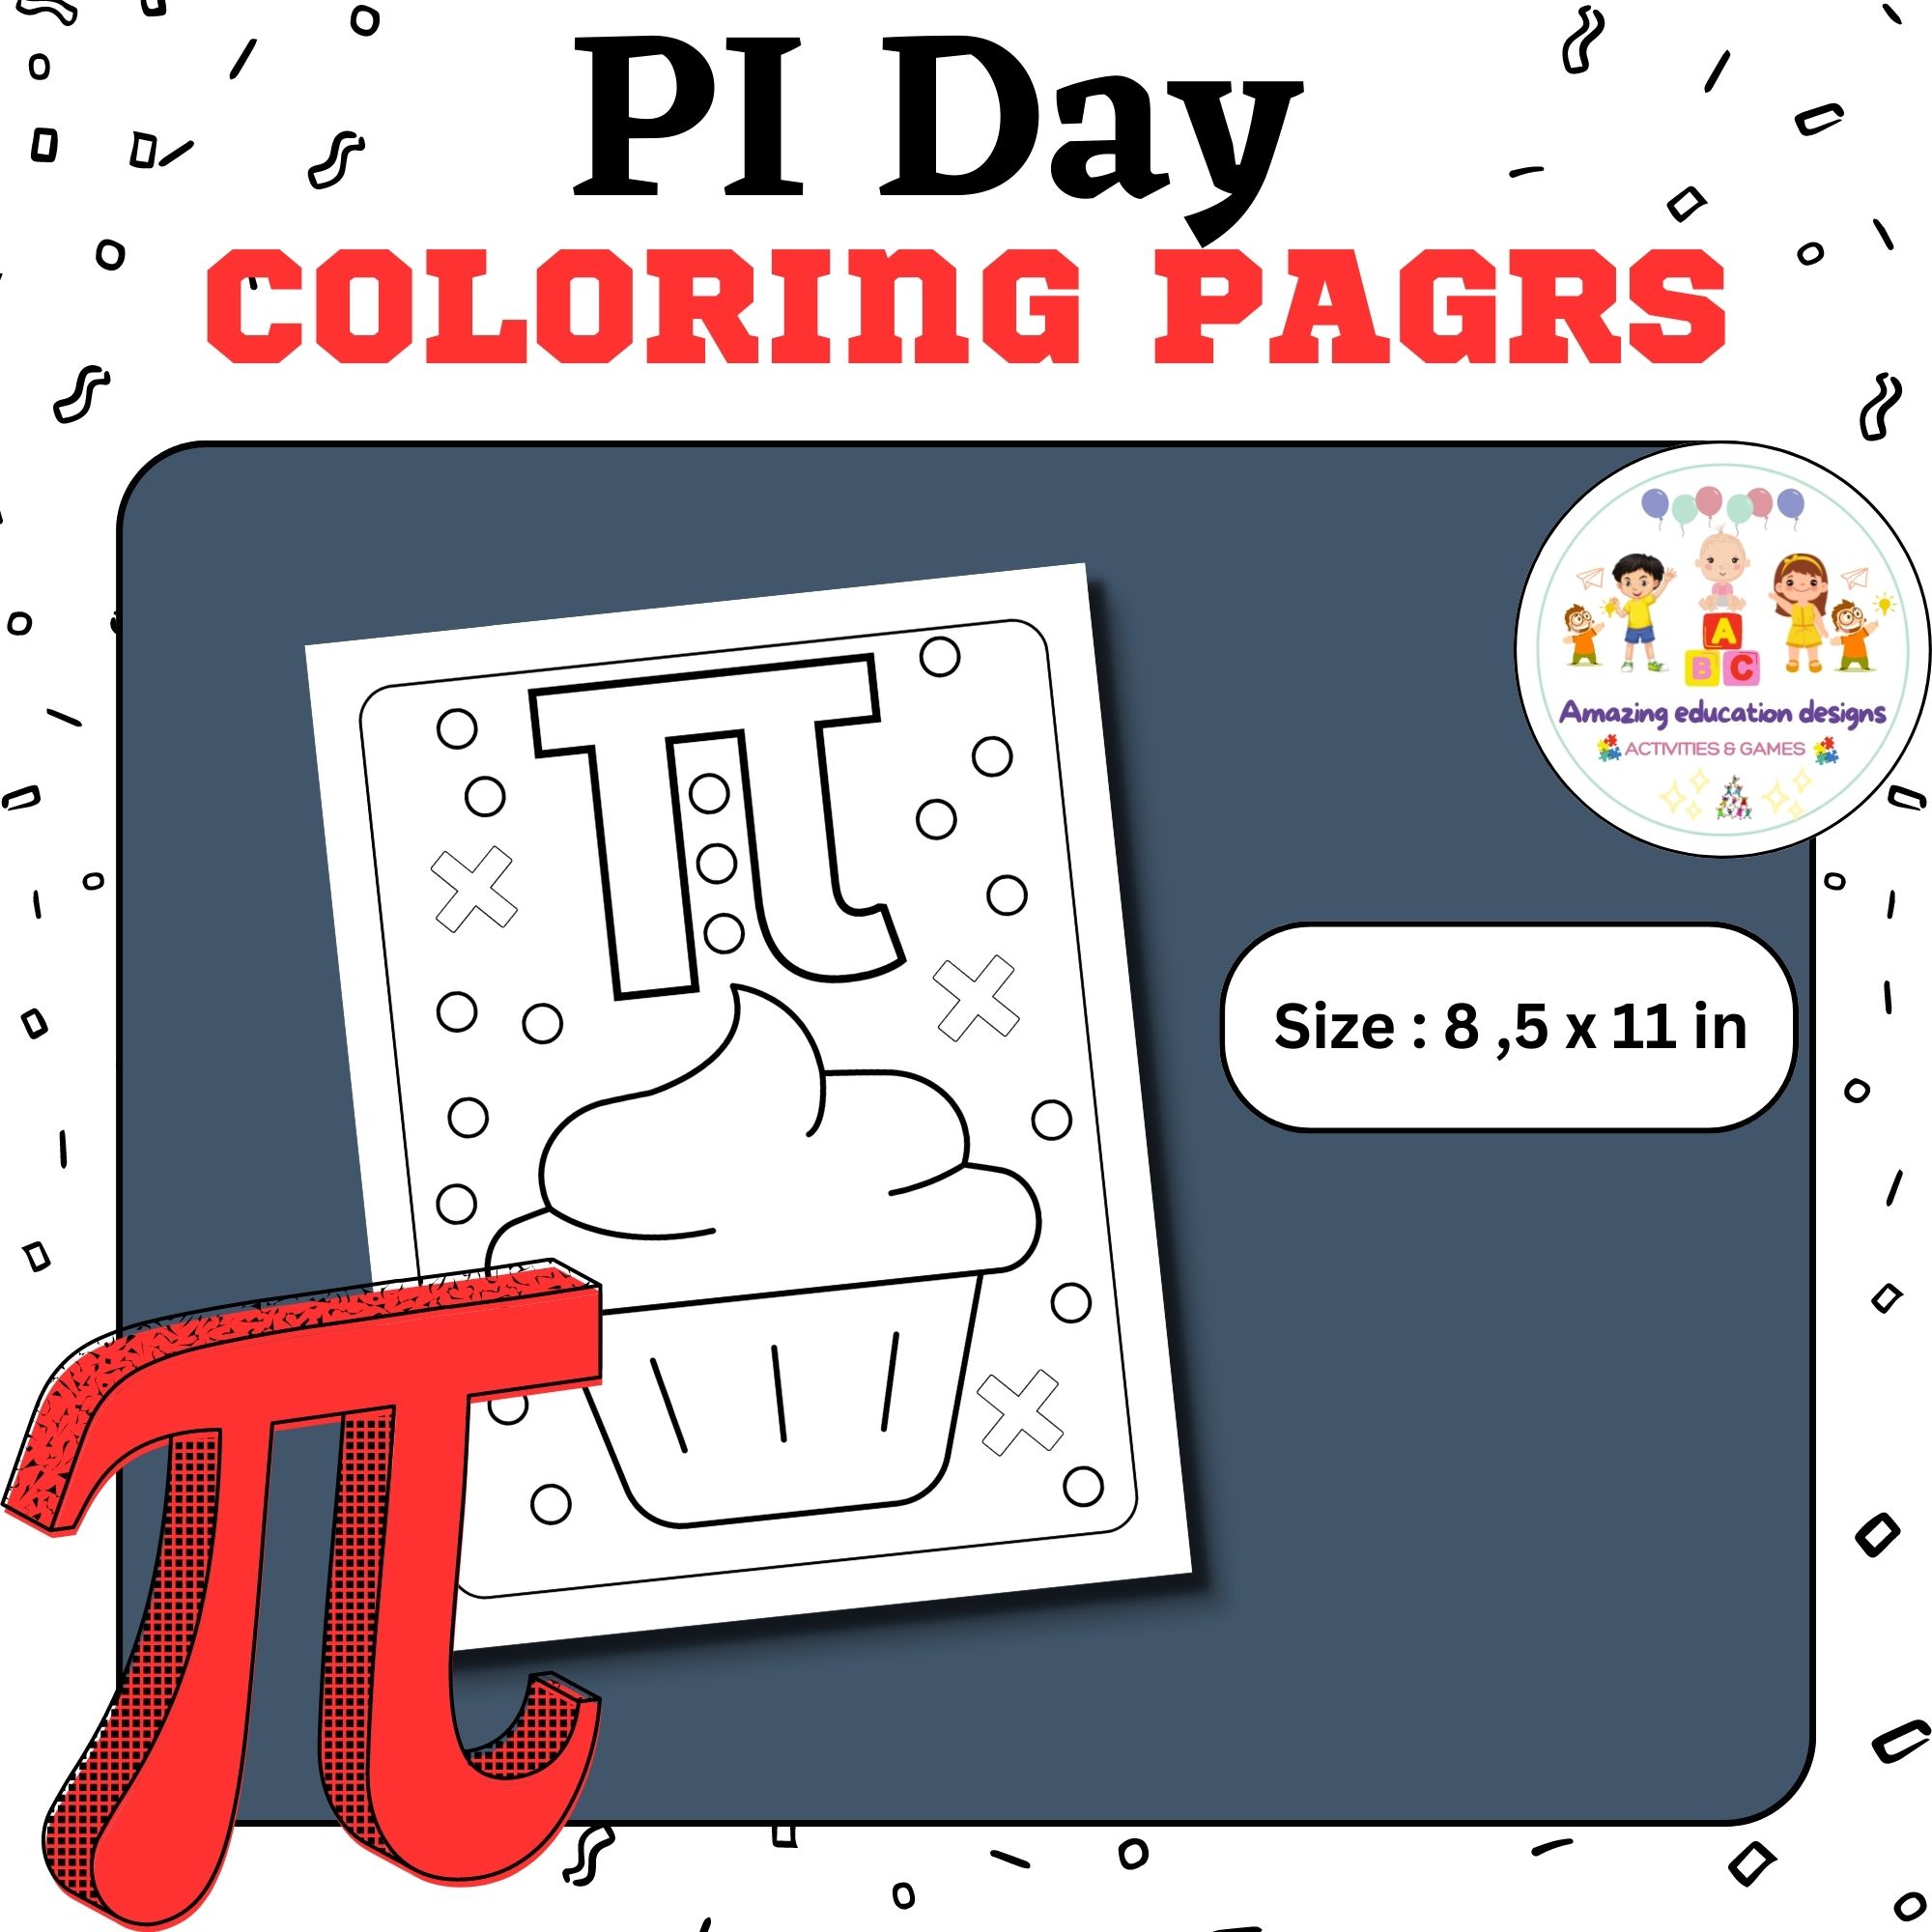 Pi day coloring pages made by teachers